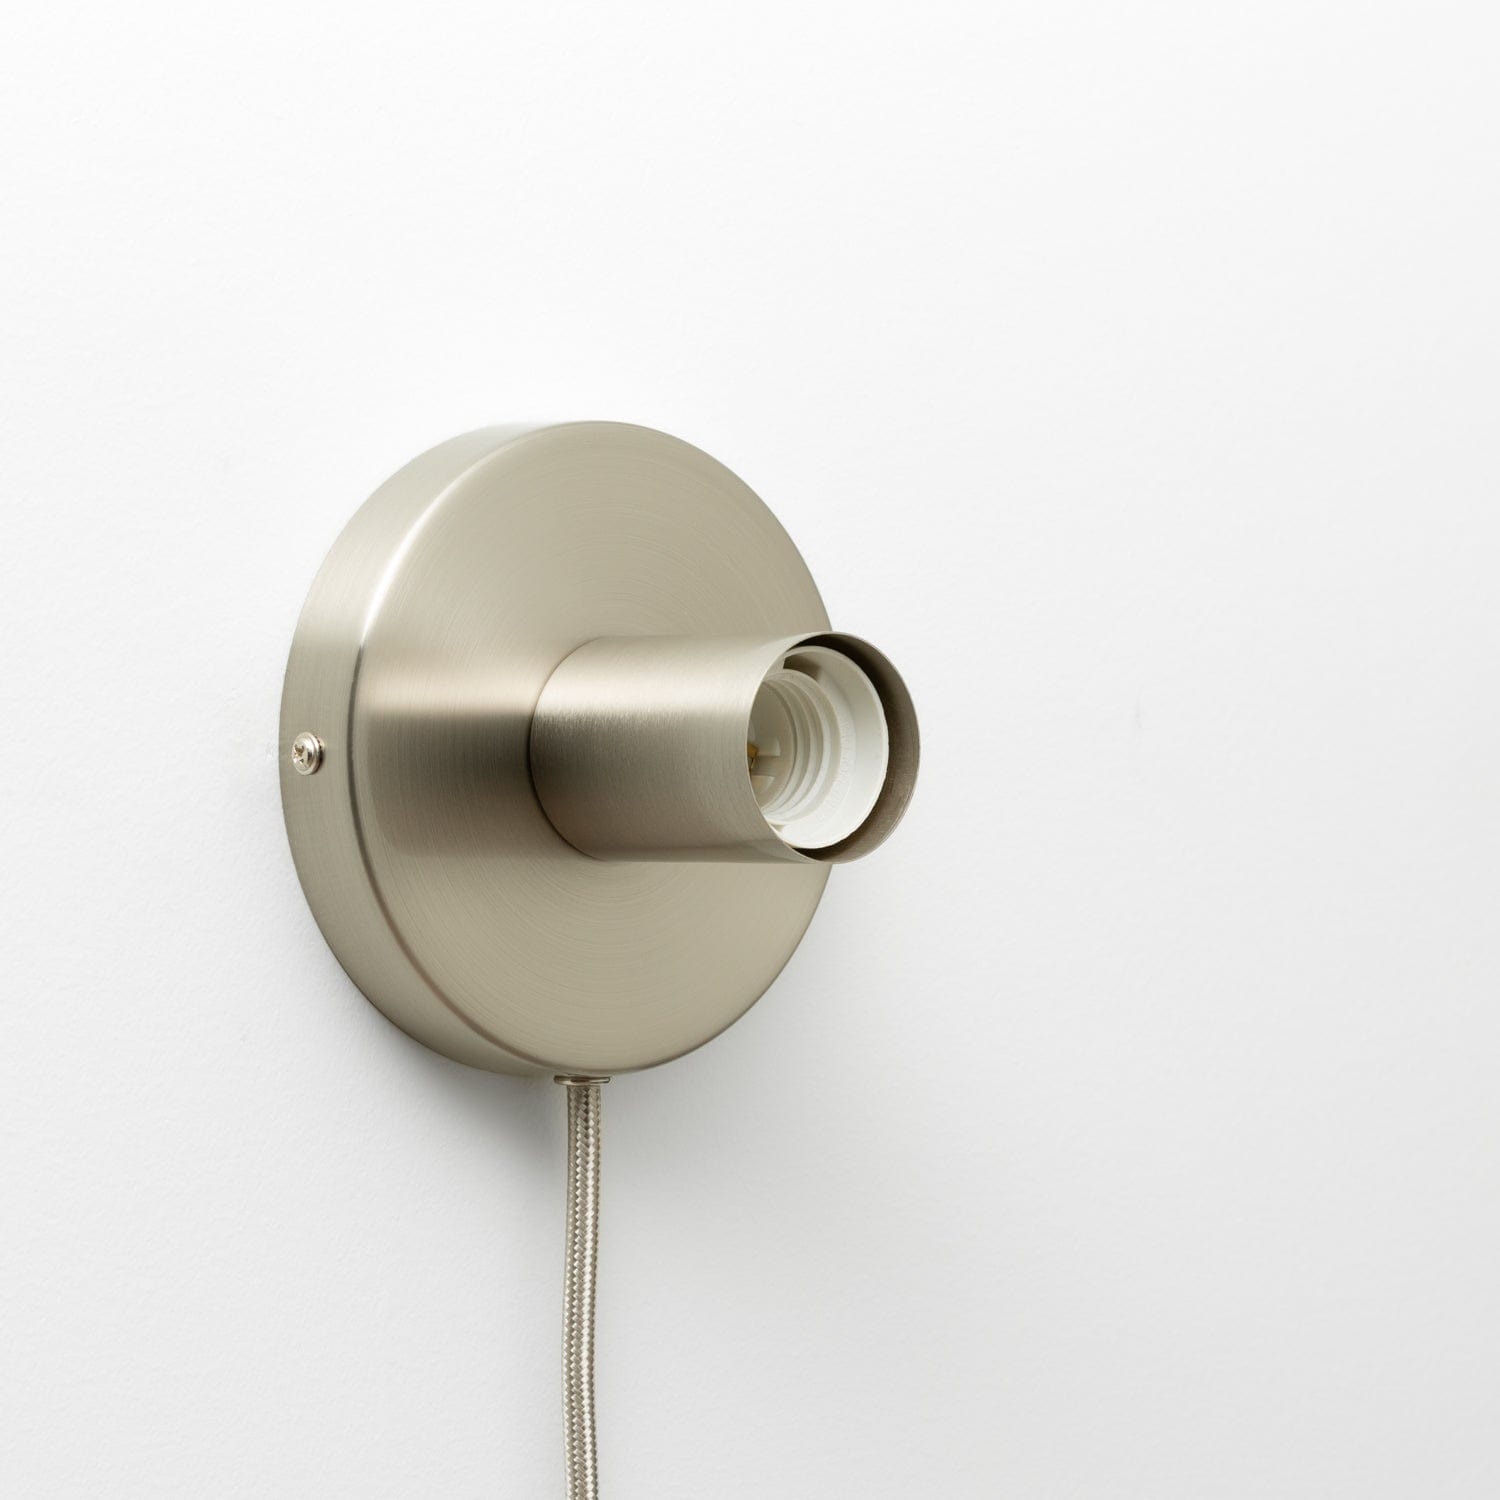 Button Plug-In Sconce in Brushed Nickel finish